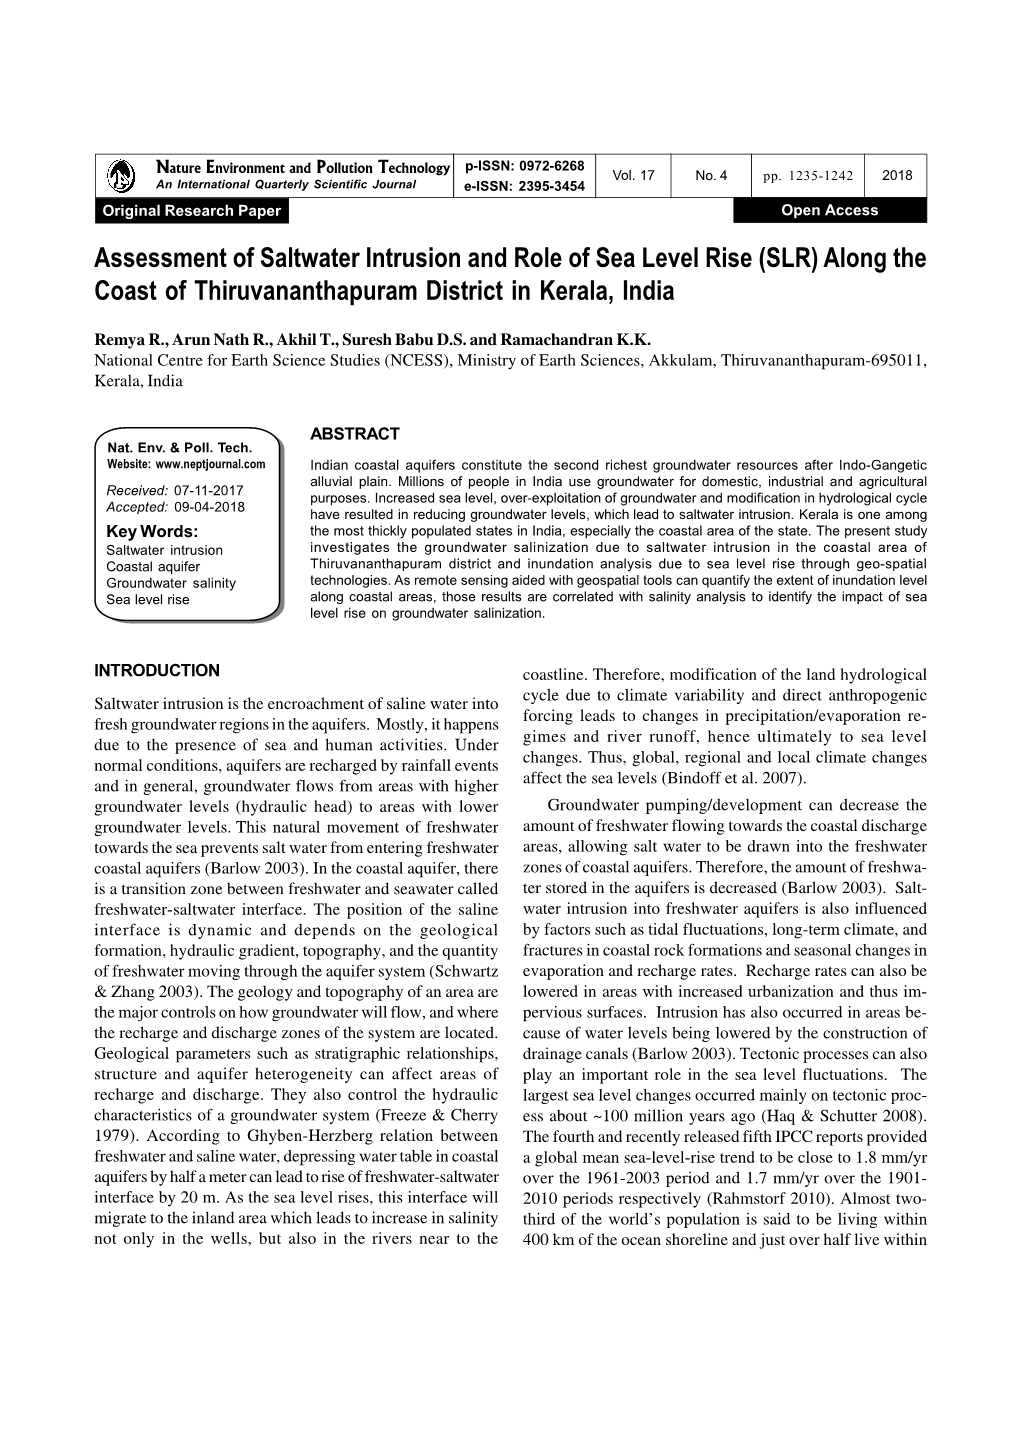 Assessment of Saltwater Intrusion and Role of Sea Level Rise (SLR) Along the Coast of Thiruvananthapuram District in Kerala, India